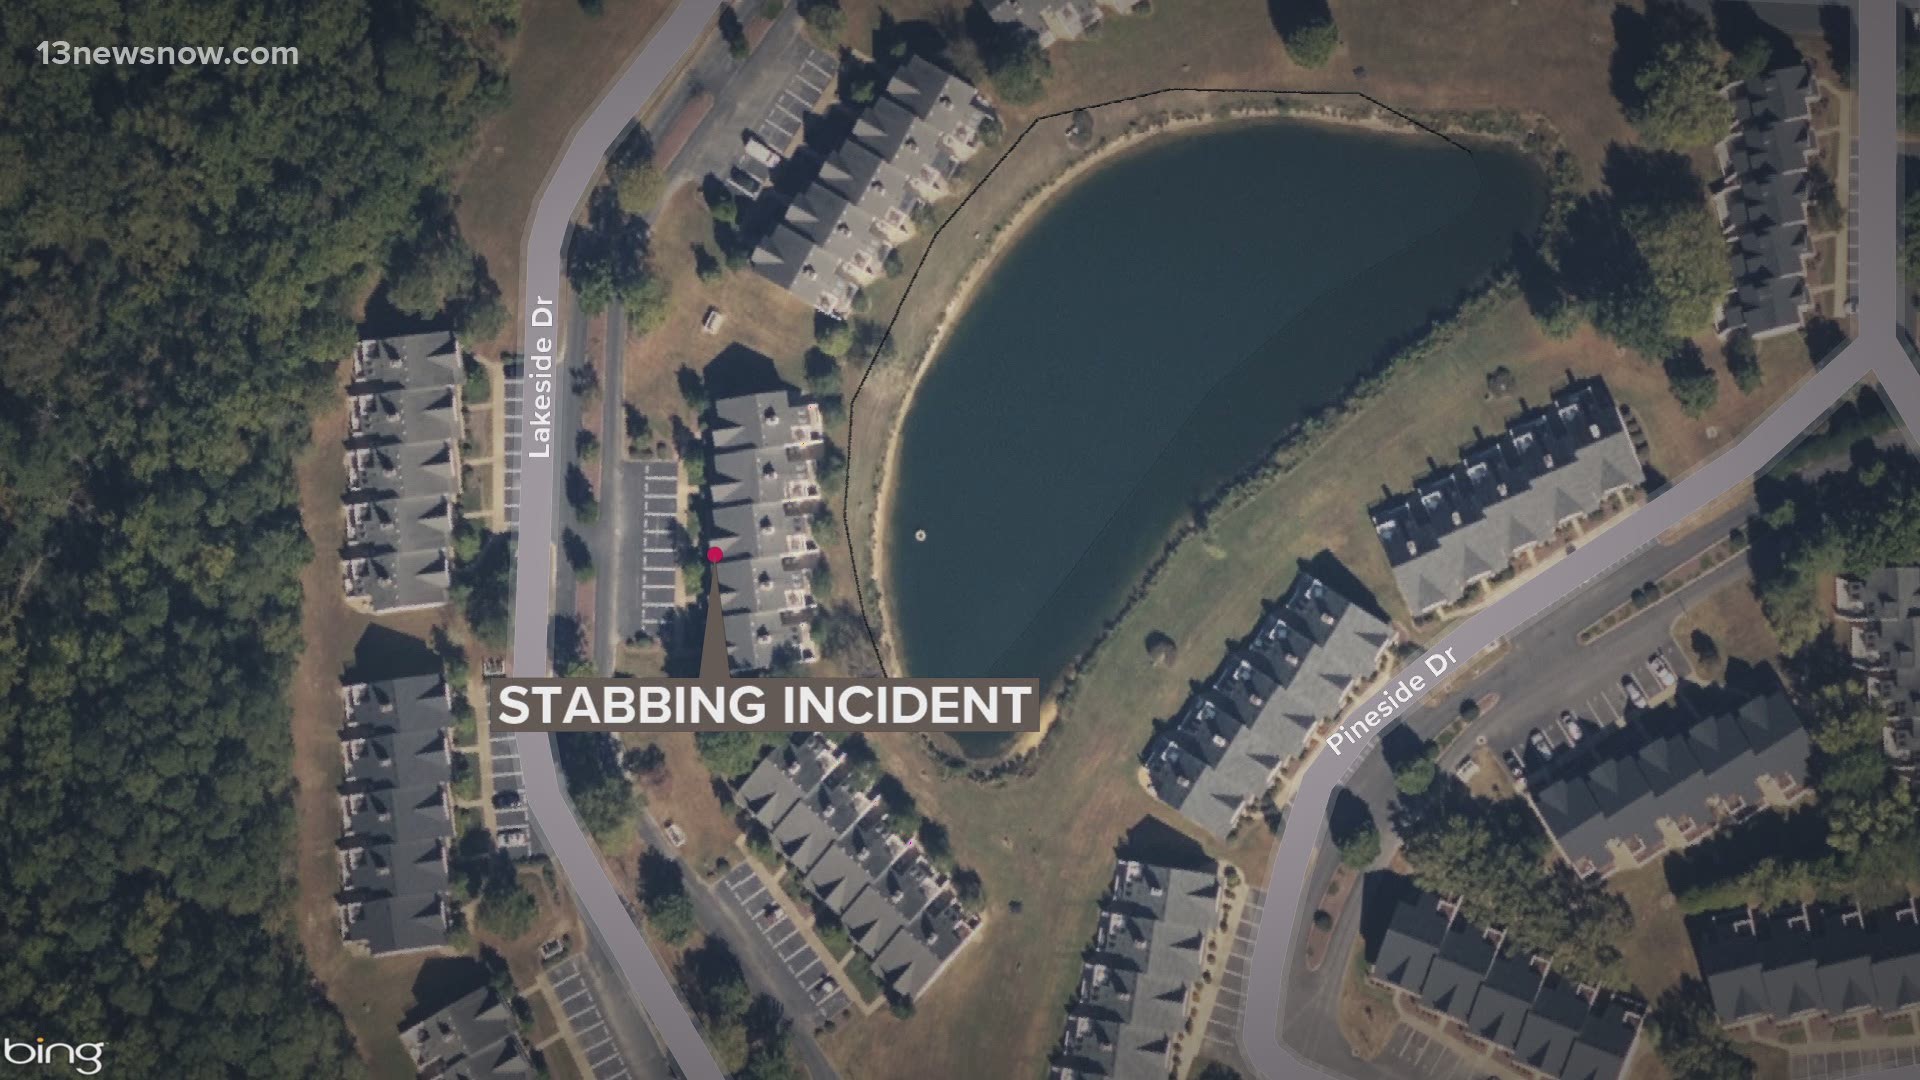 The 22-year-old Newport News man who suffered 13 stab wounds was recently released from the hospital. Another victim, who was stabbed once, refused treatment.